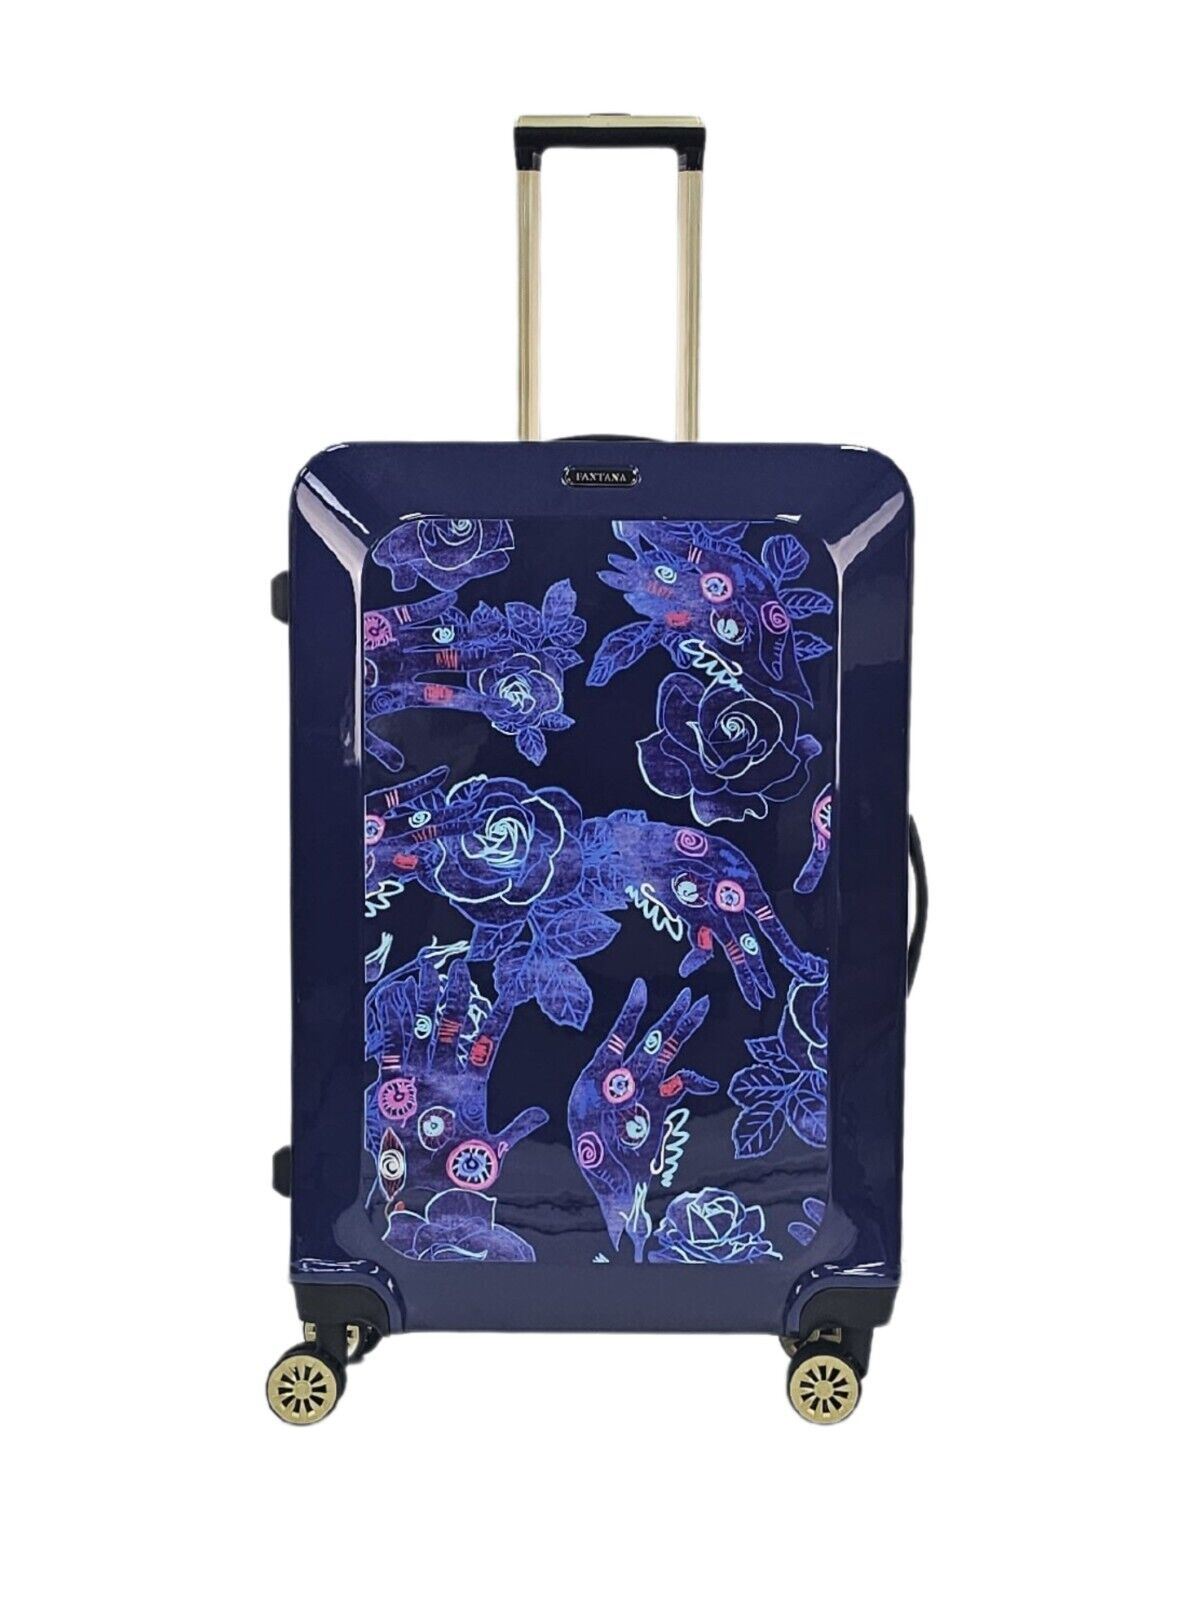 Butler Large Hard Shell Suitcase in Blue